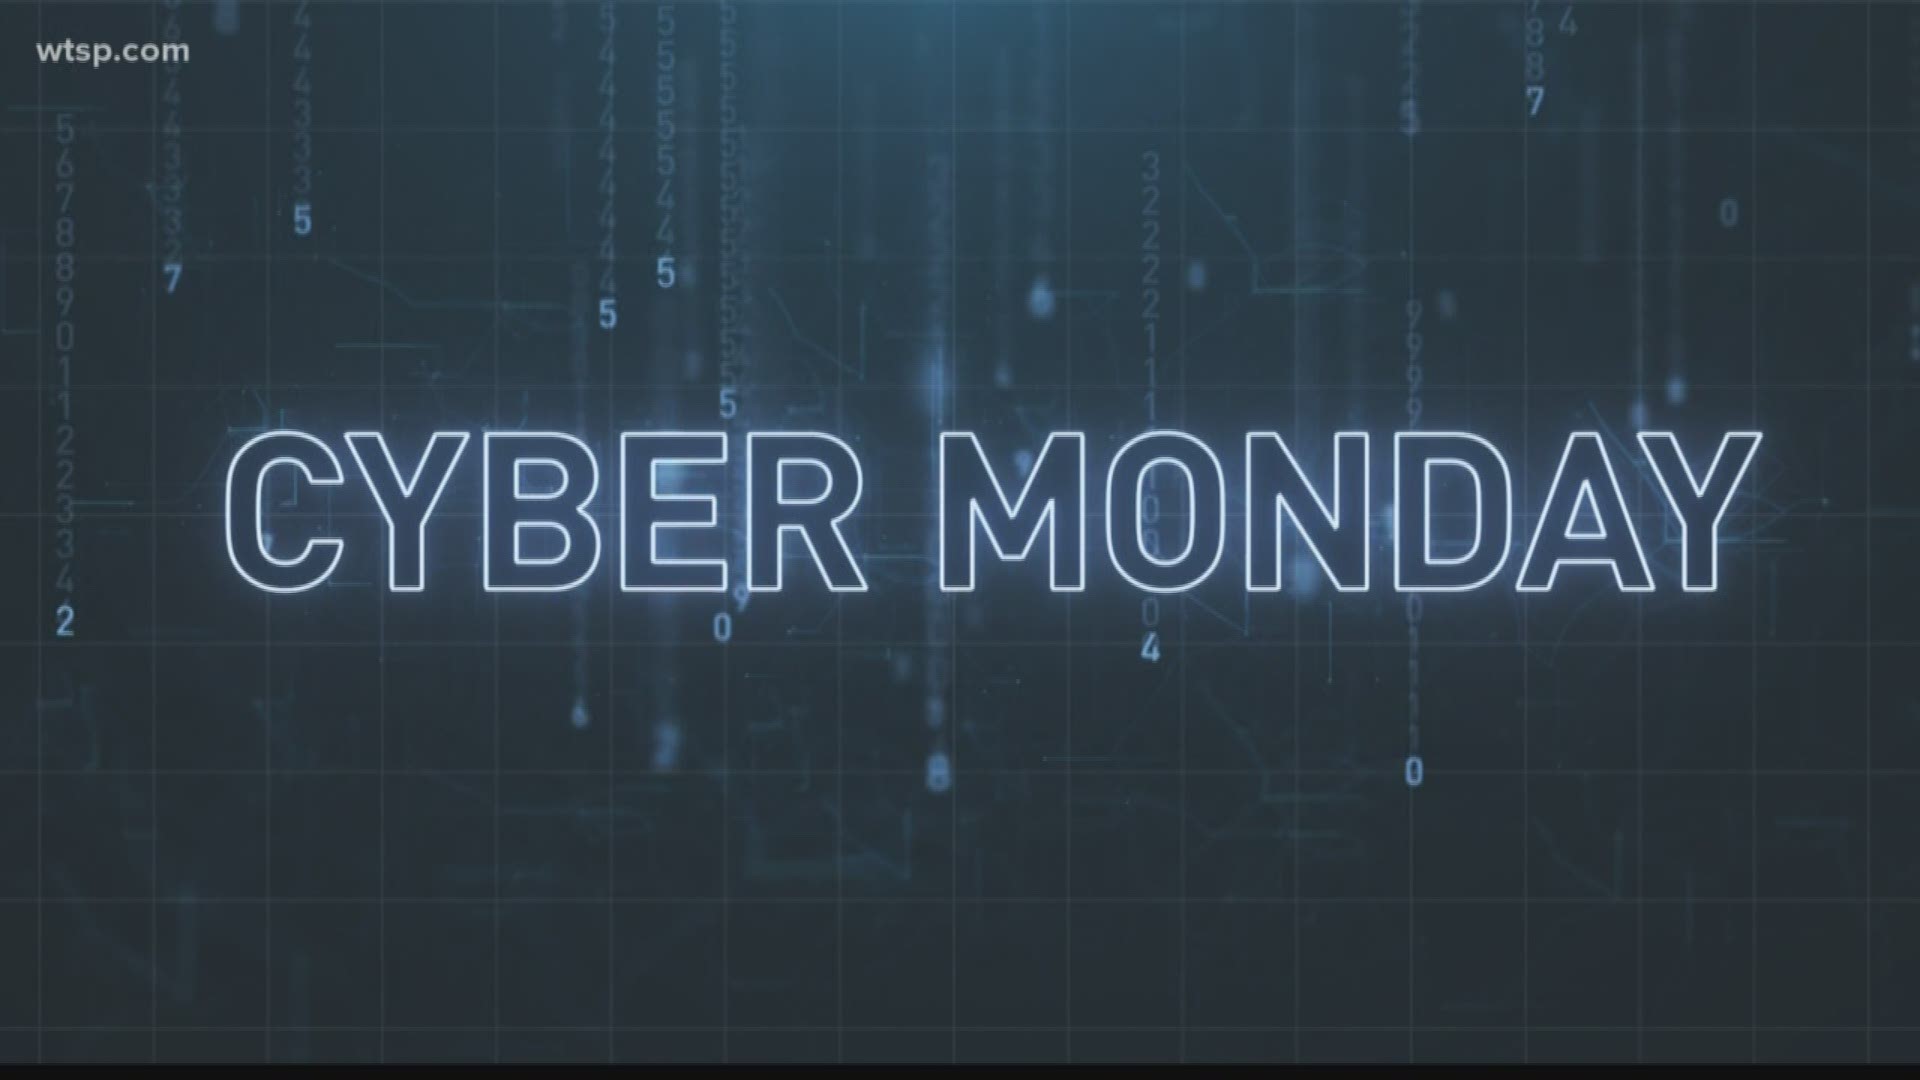 Cyber Monday means retailers are offering deep discounts for the holiday season, so here's how to shop online safely.